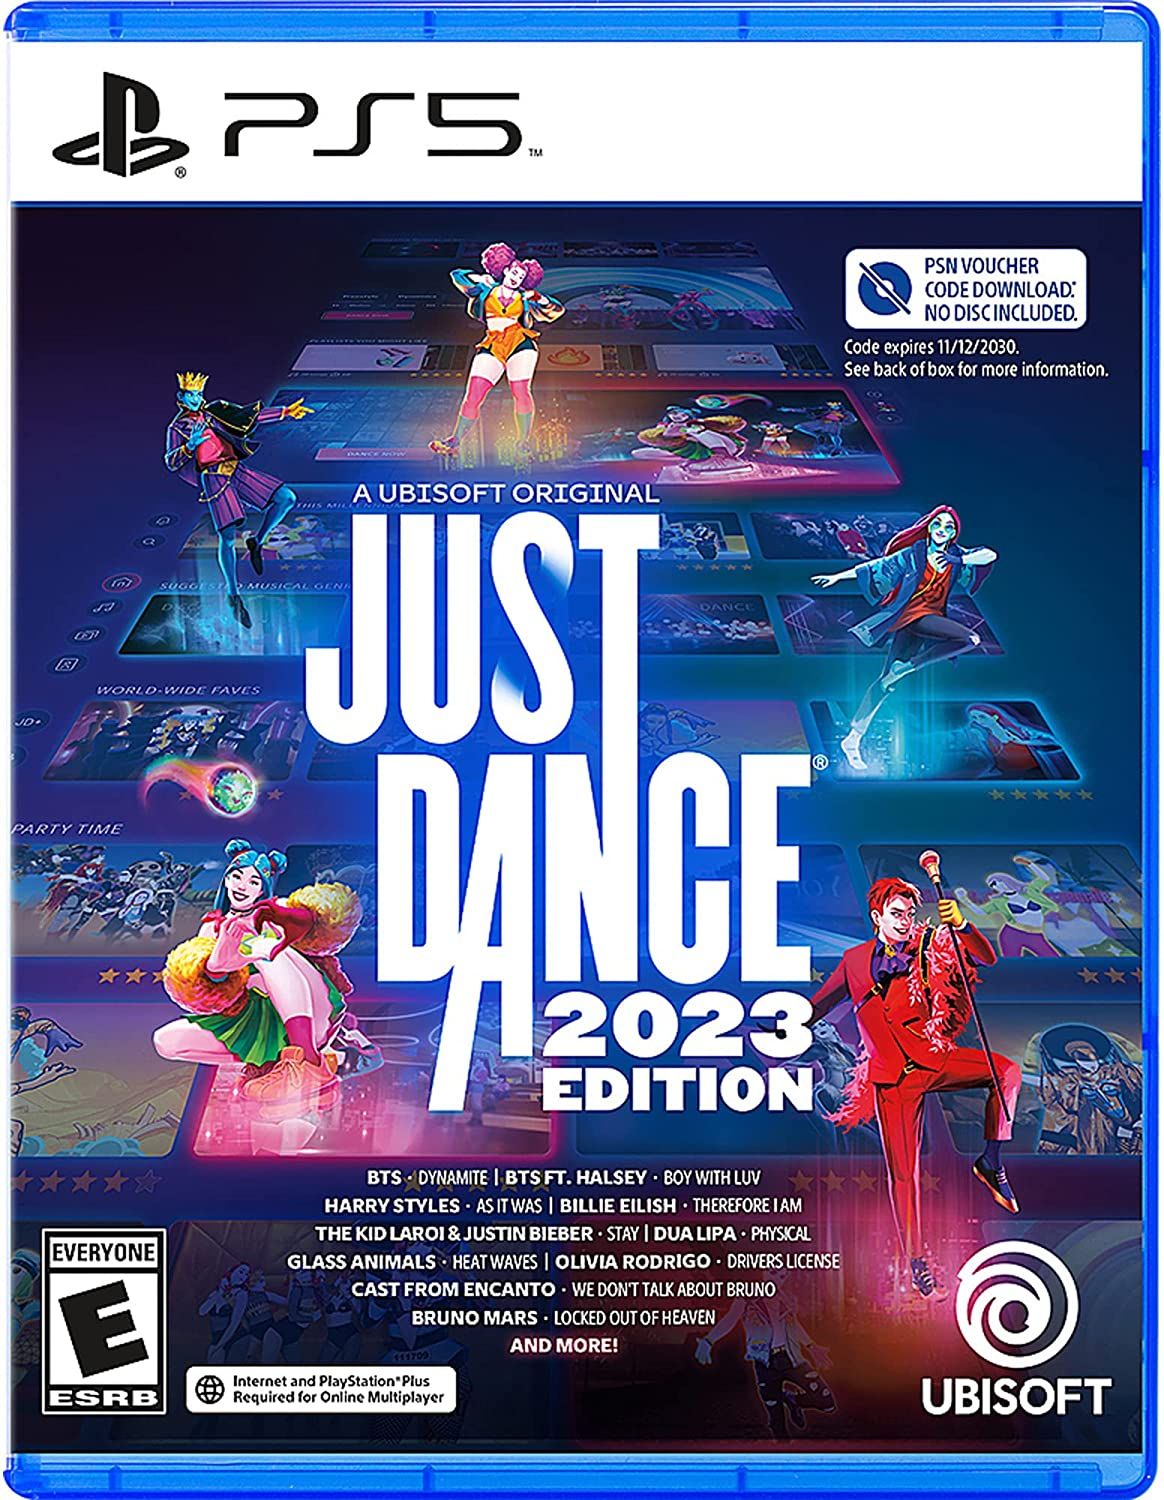 Just Dance 2023 Edition case for PS5.